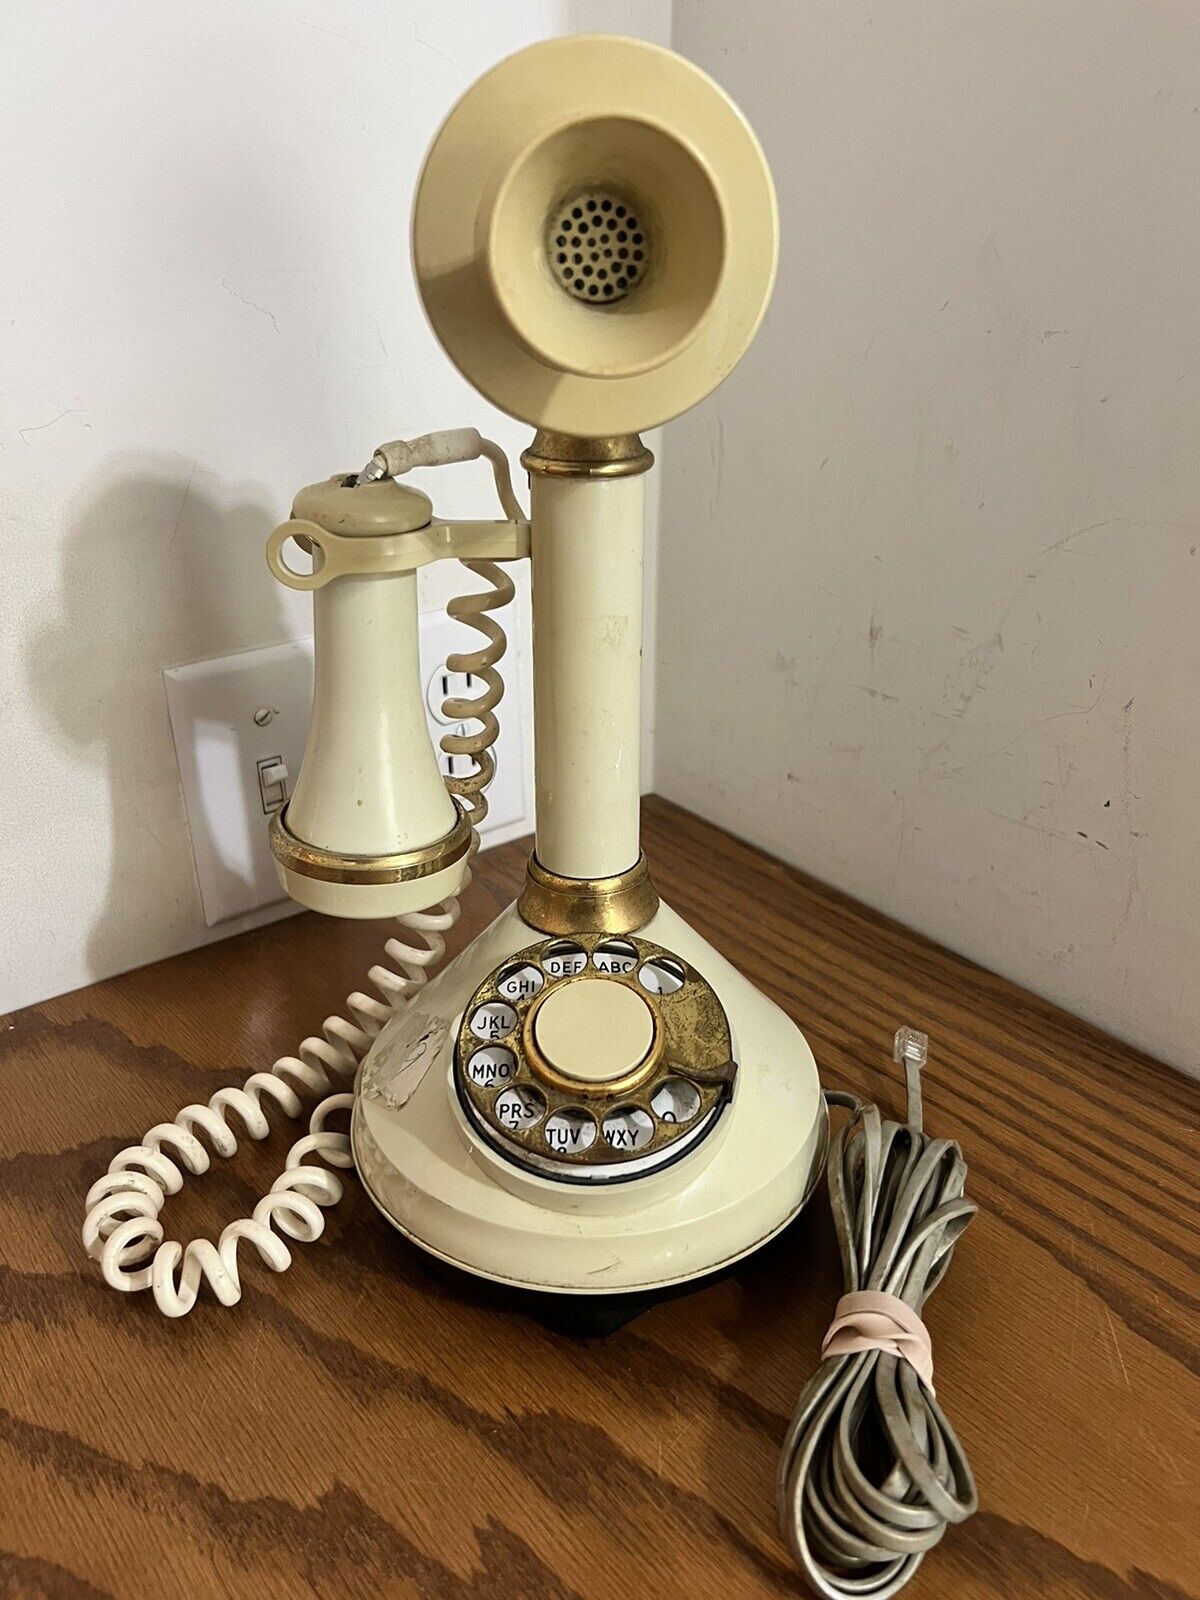 Vintage Original Rotary Candlestick Phone Telephone With Working Dial Tone